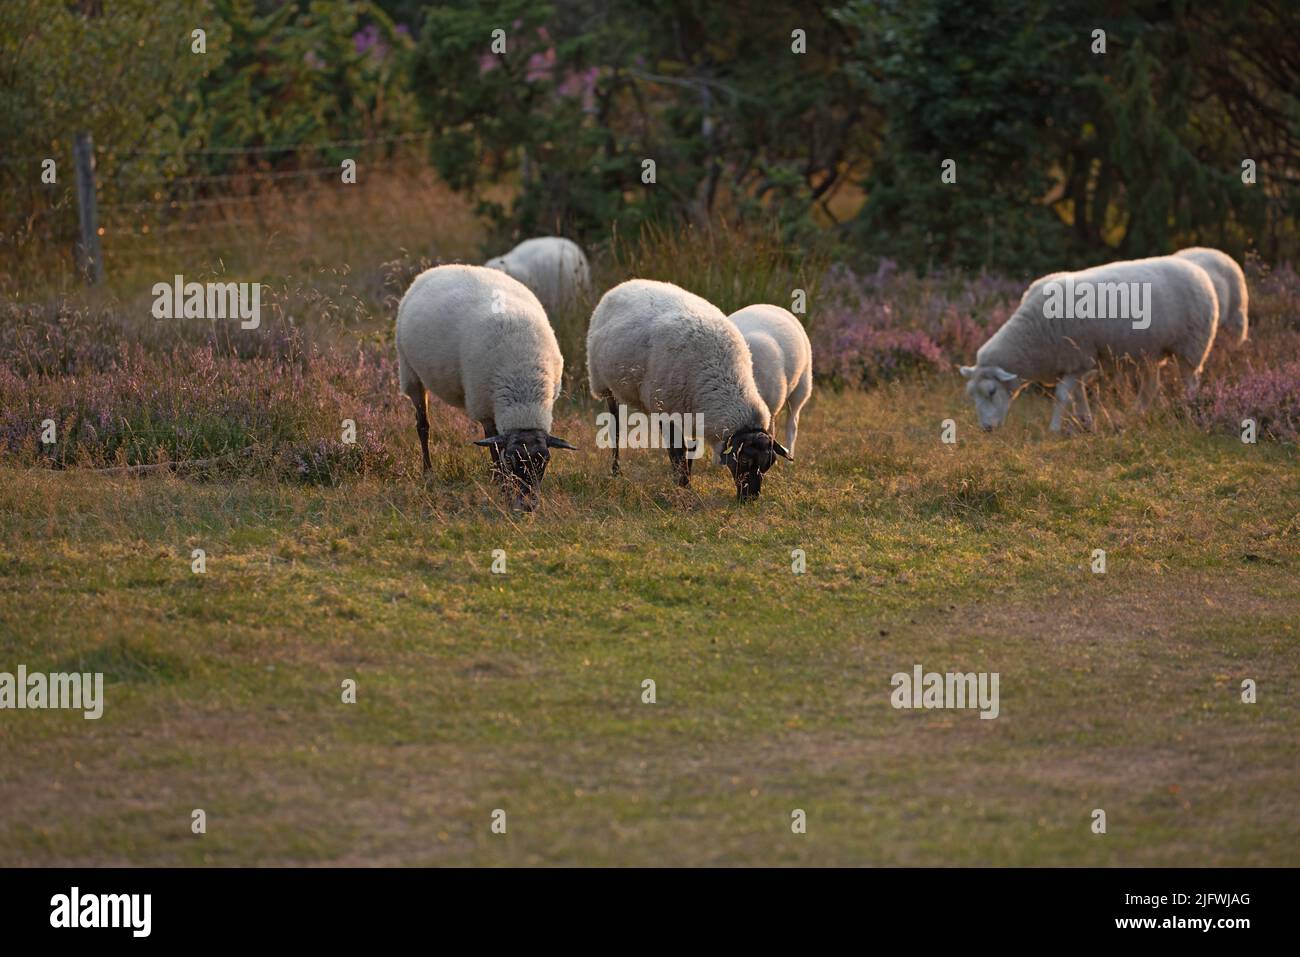 Sheep grazing in a heather meadow during sunset in Rebild National Park, Denmark. A flock of woolly lambs walking and eating grass on a blooming field Stock Photo